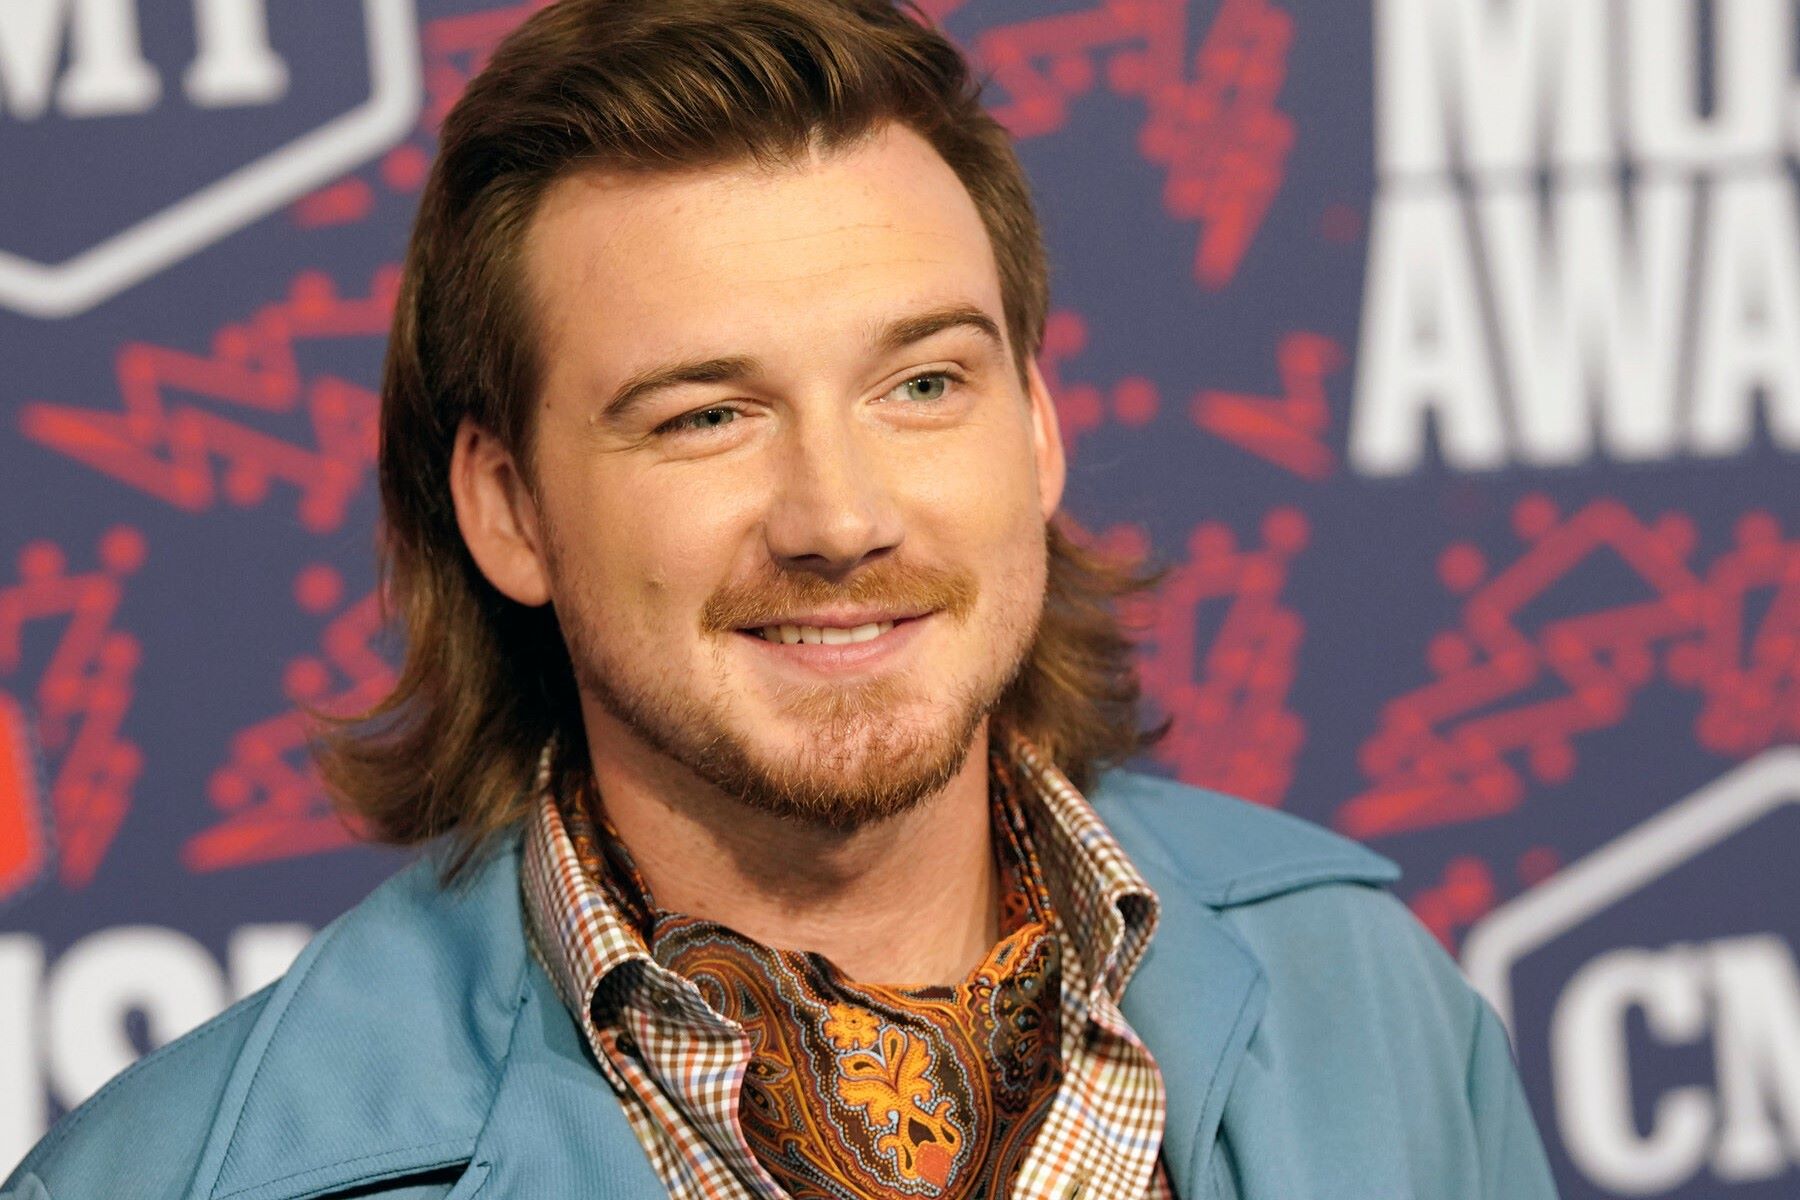 Unveiling The Heartfelt Lyrics Of Morgan Wallen’s “Thought You Should Know”